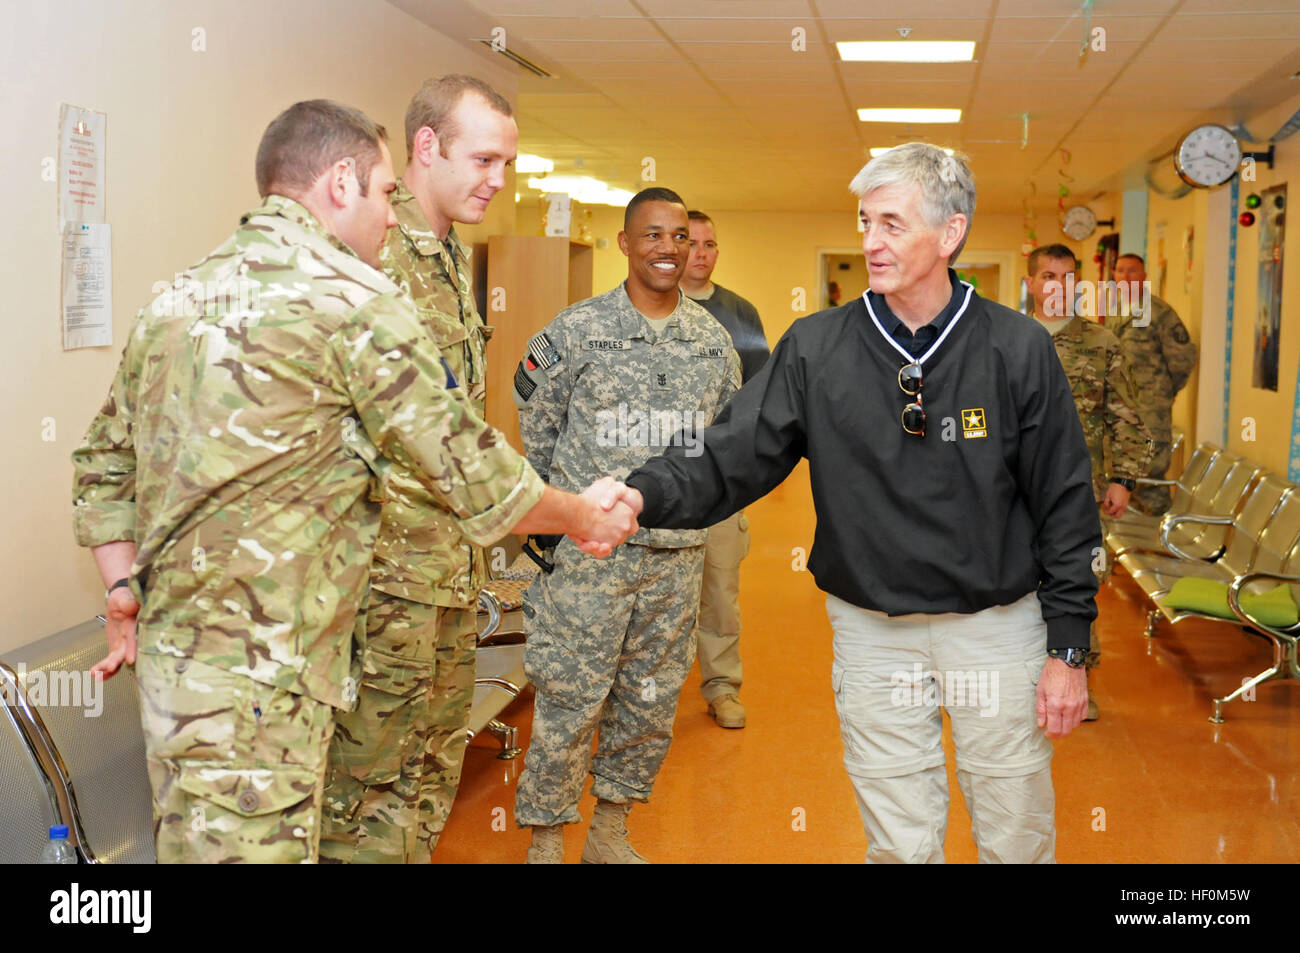 Hon. John McHugh, secretary of the Army, being escorted by Navy Master Chief Petty Officer Keith Staples, Task Force Medical- South and NATO Role 3 Multinational Hospital master chief, greets British hospital workers during a visit to Kandahar Airfield Dec. 14. The objective of McHugh's visit was to assess the current status of U.S.-Afghan relations in RC(S) and to see military training and facilities. Secretary of the Army meets hospital workers at Kandahar Airfield's Role 3 DVIDS499697 Stock Photo